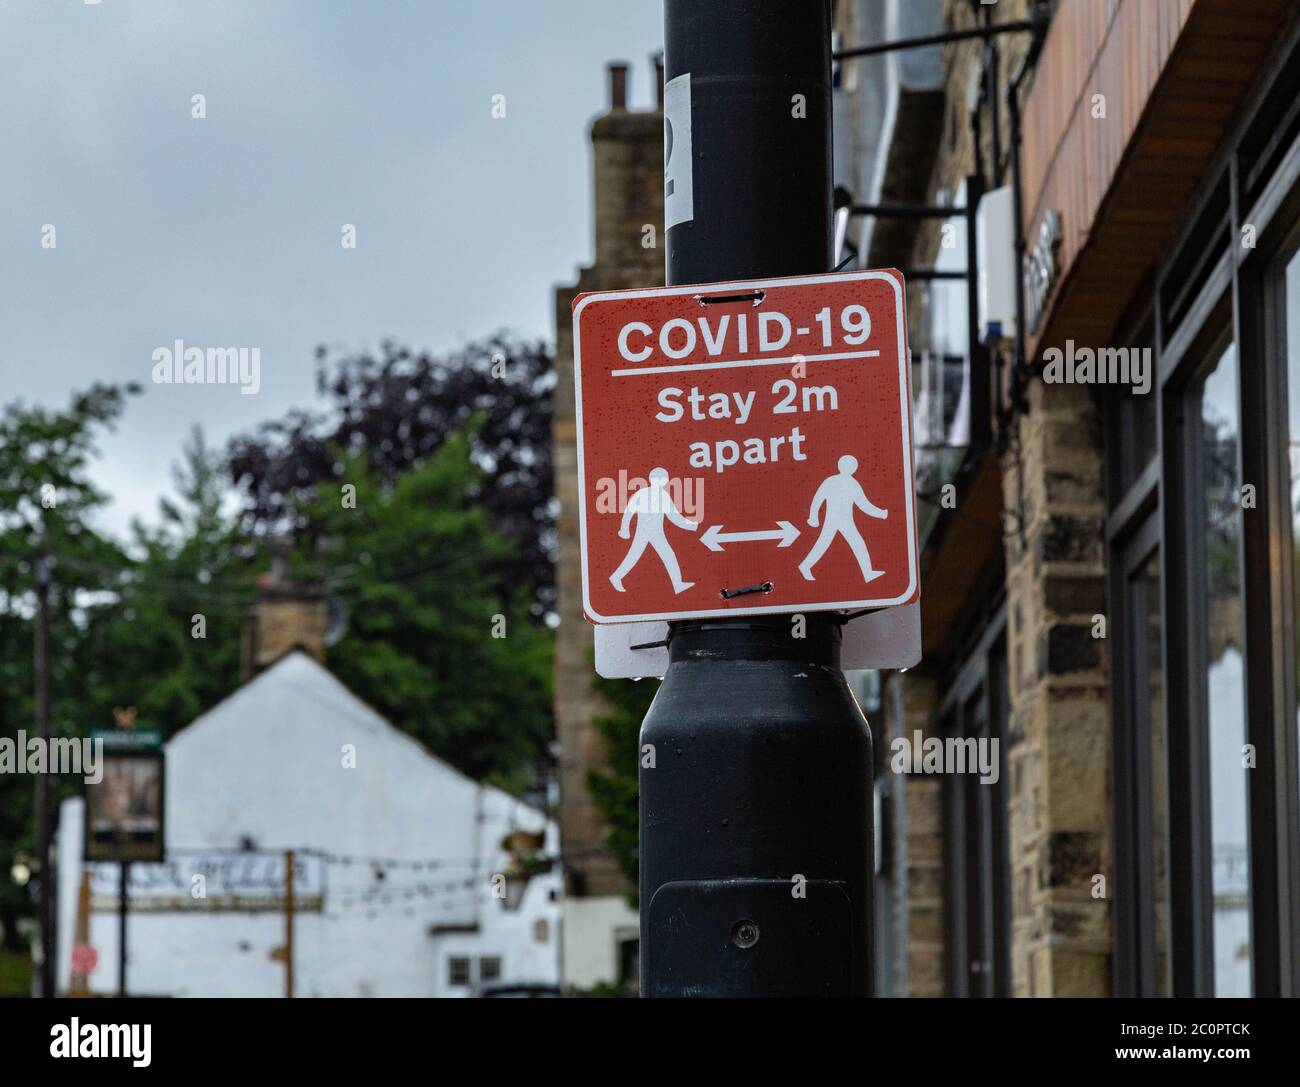 A red and white Covid-19 sign on a lamp post outside shops in Baildon, Yorkshire. The sign advises pedestrians to stay 2 metres apart. Stock Photo